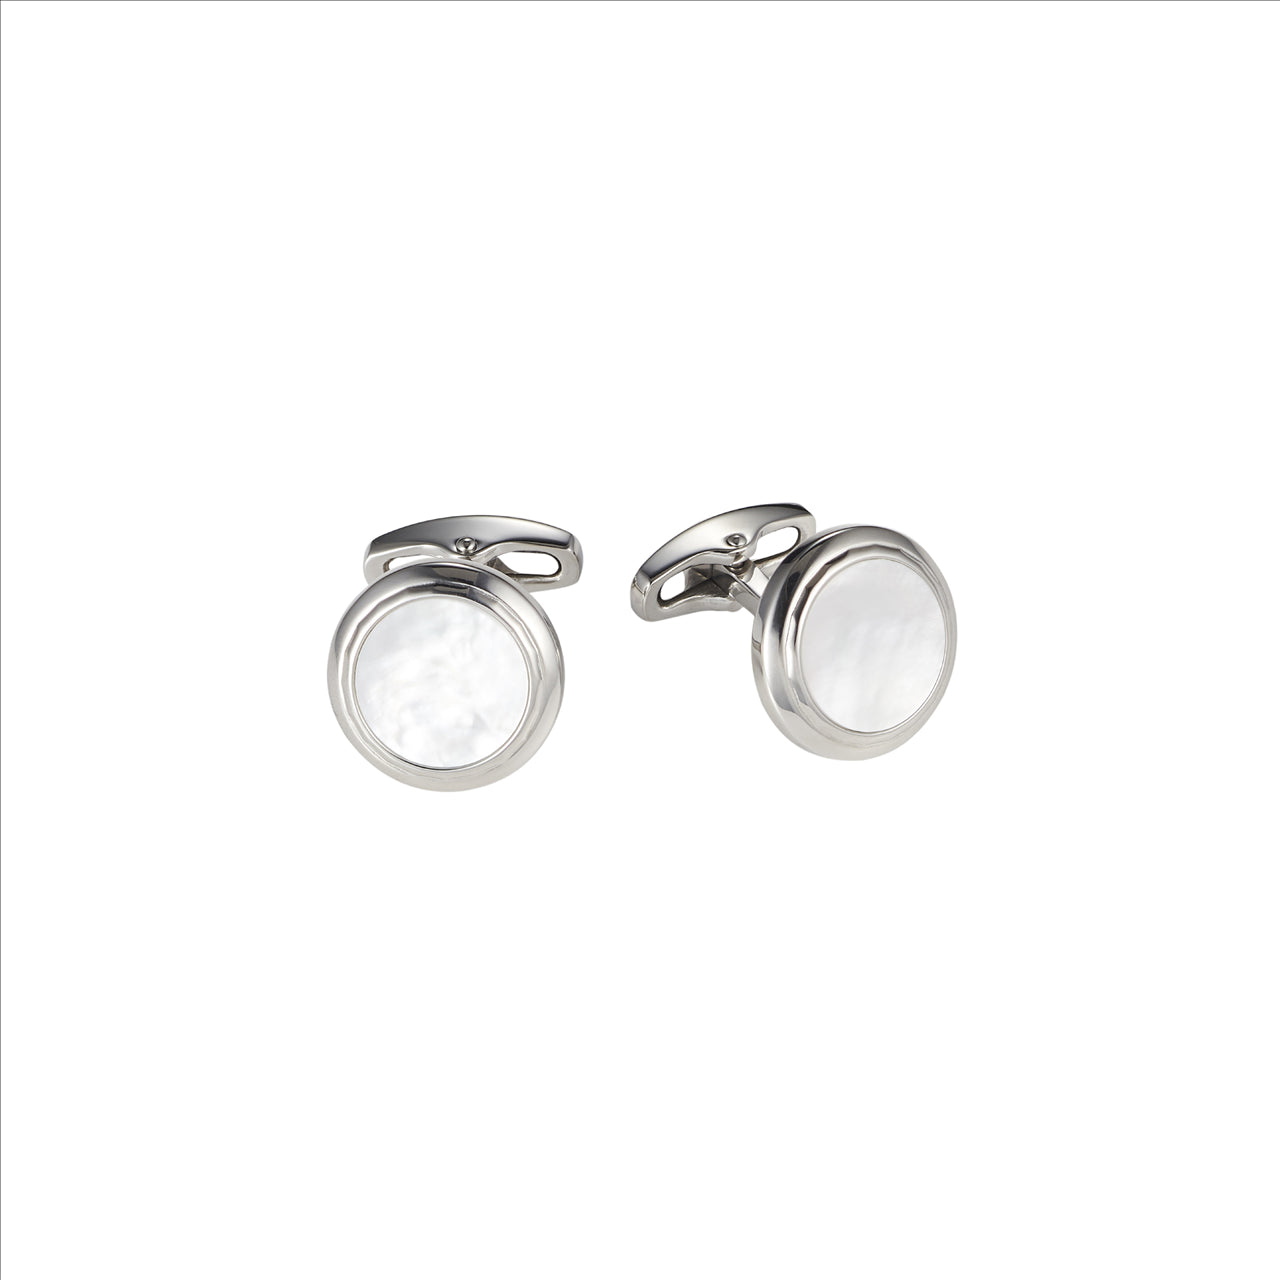 Stainless steel Mother of Pearl cufflinks